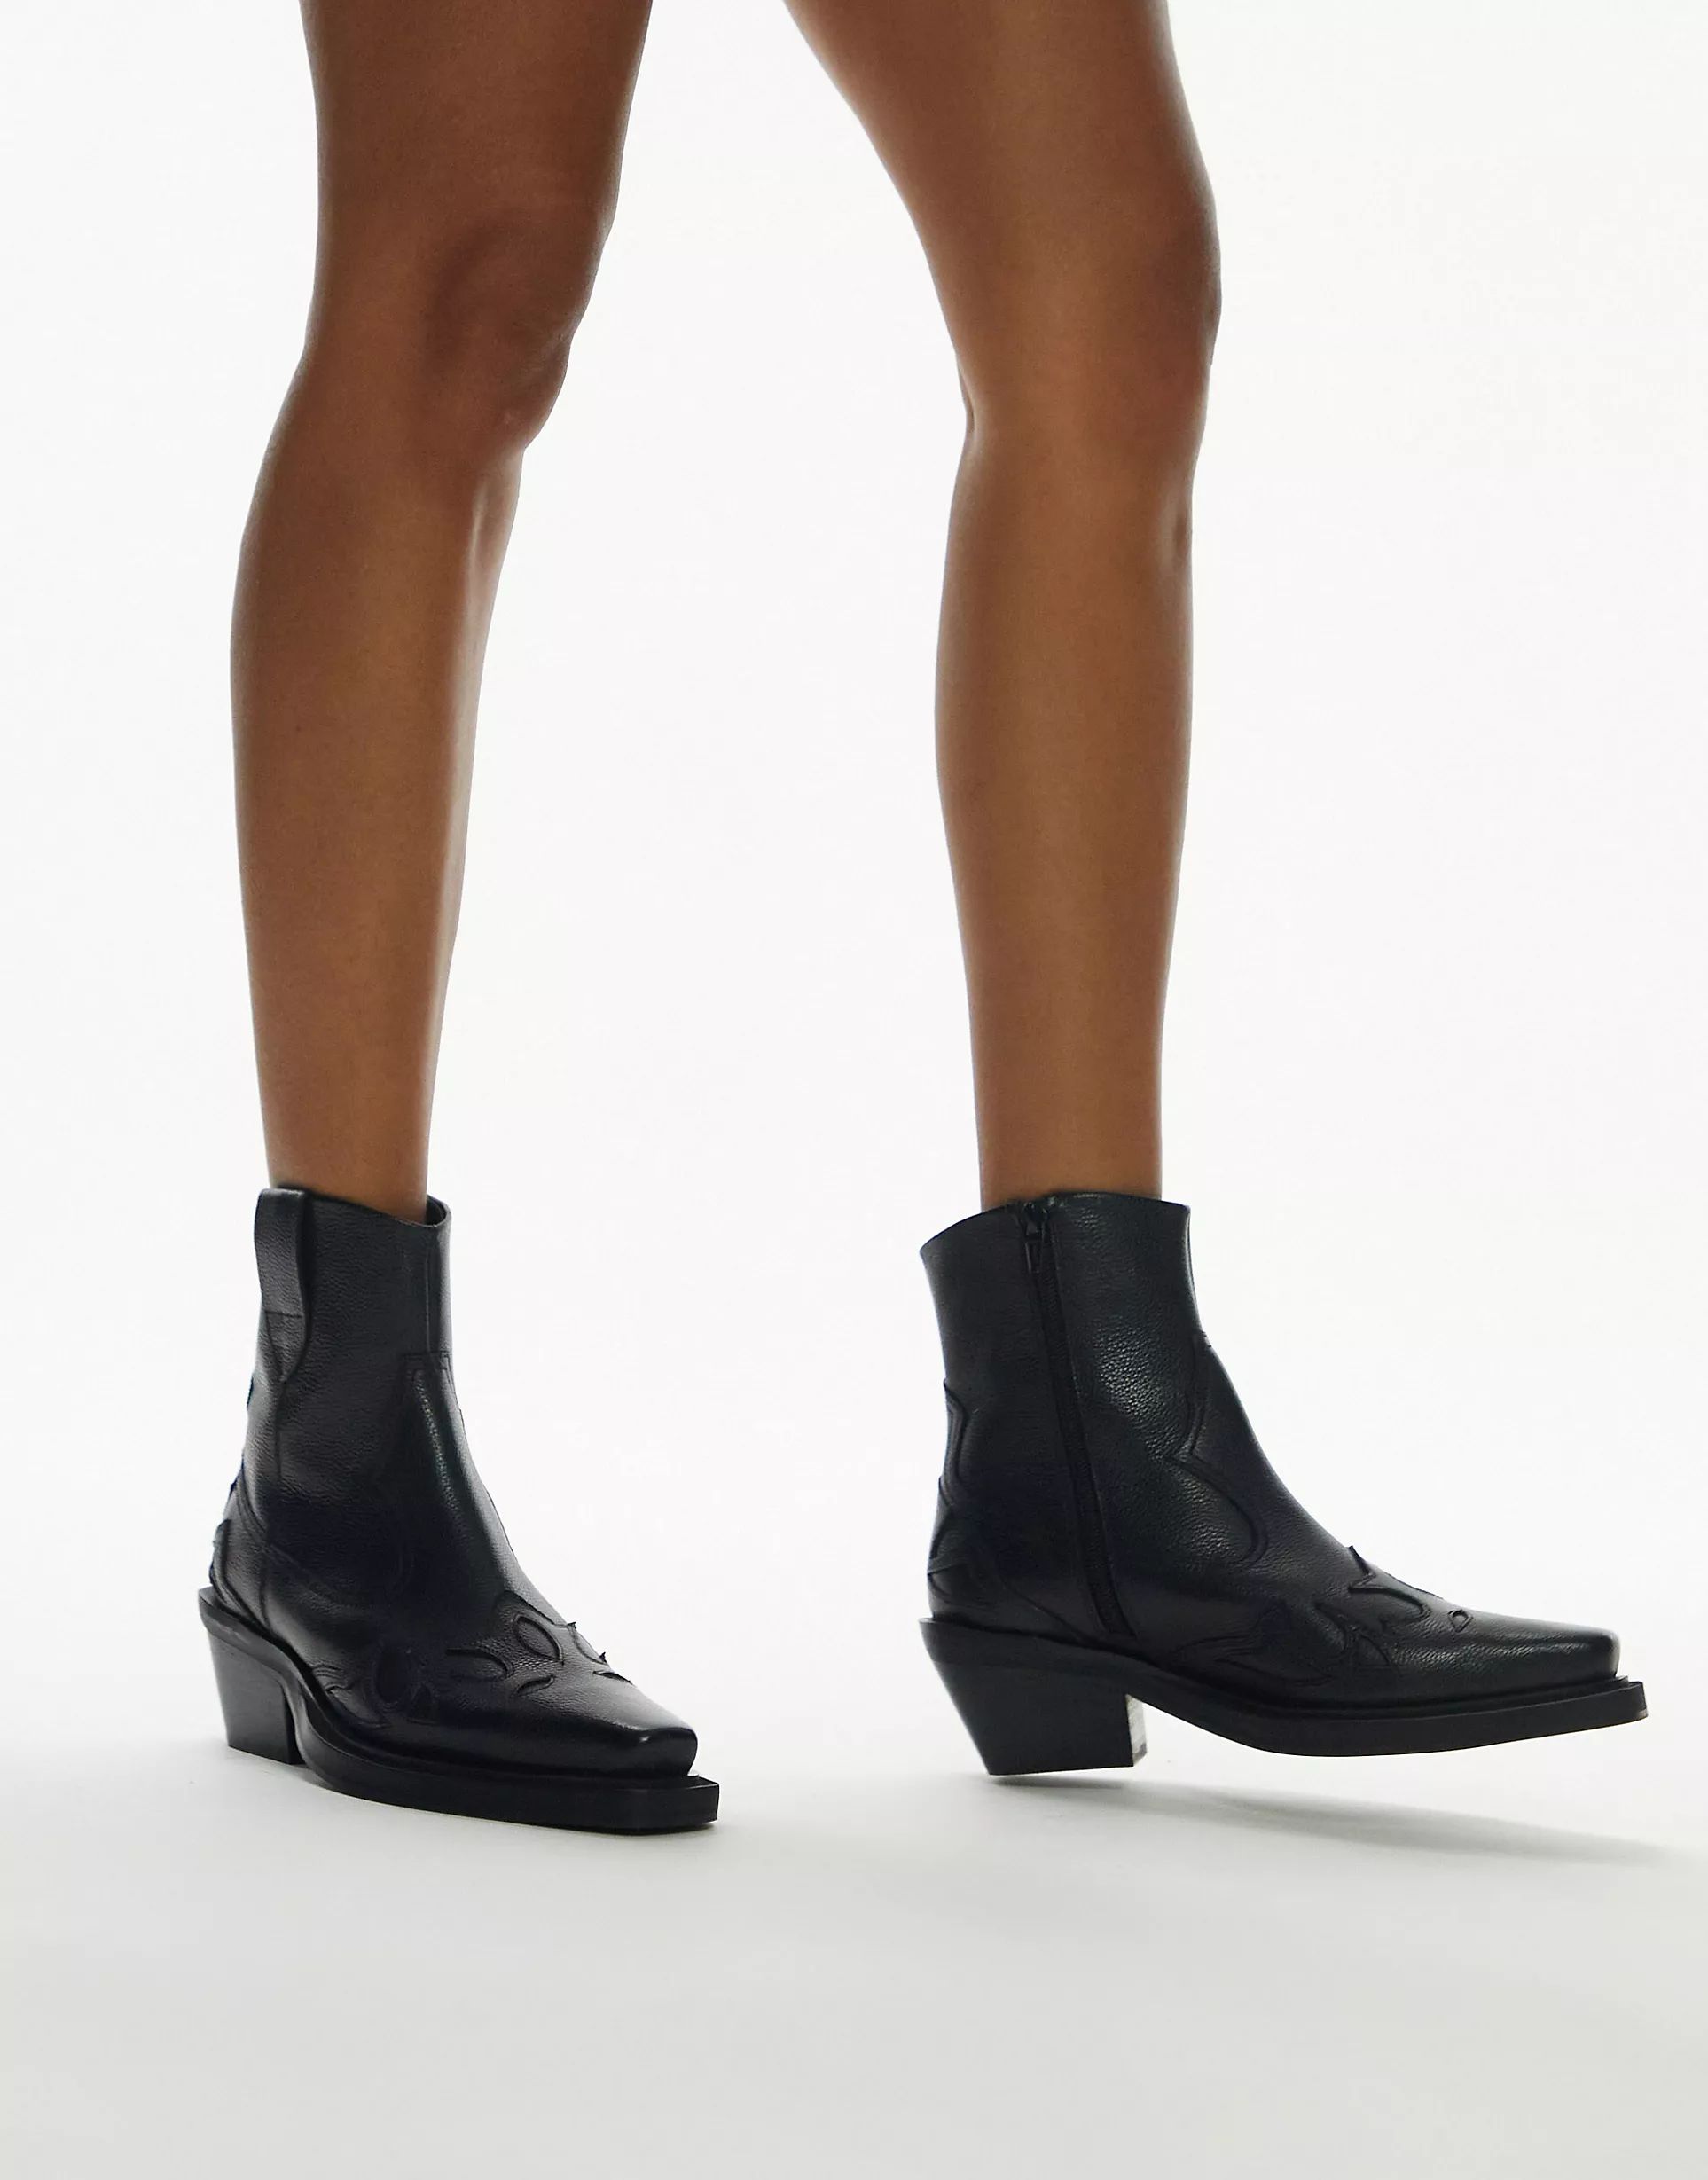 Topshop Lena leather western ankle boot in black | ASOS | ASOS (Global)